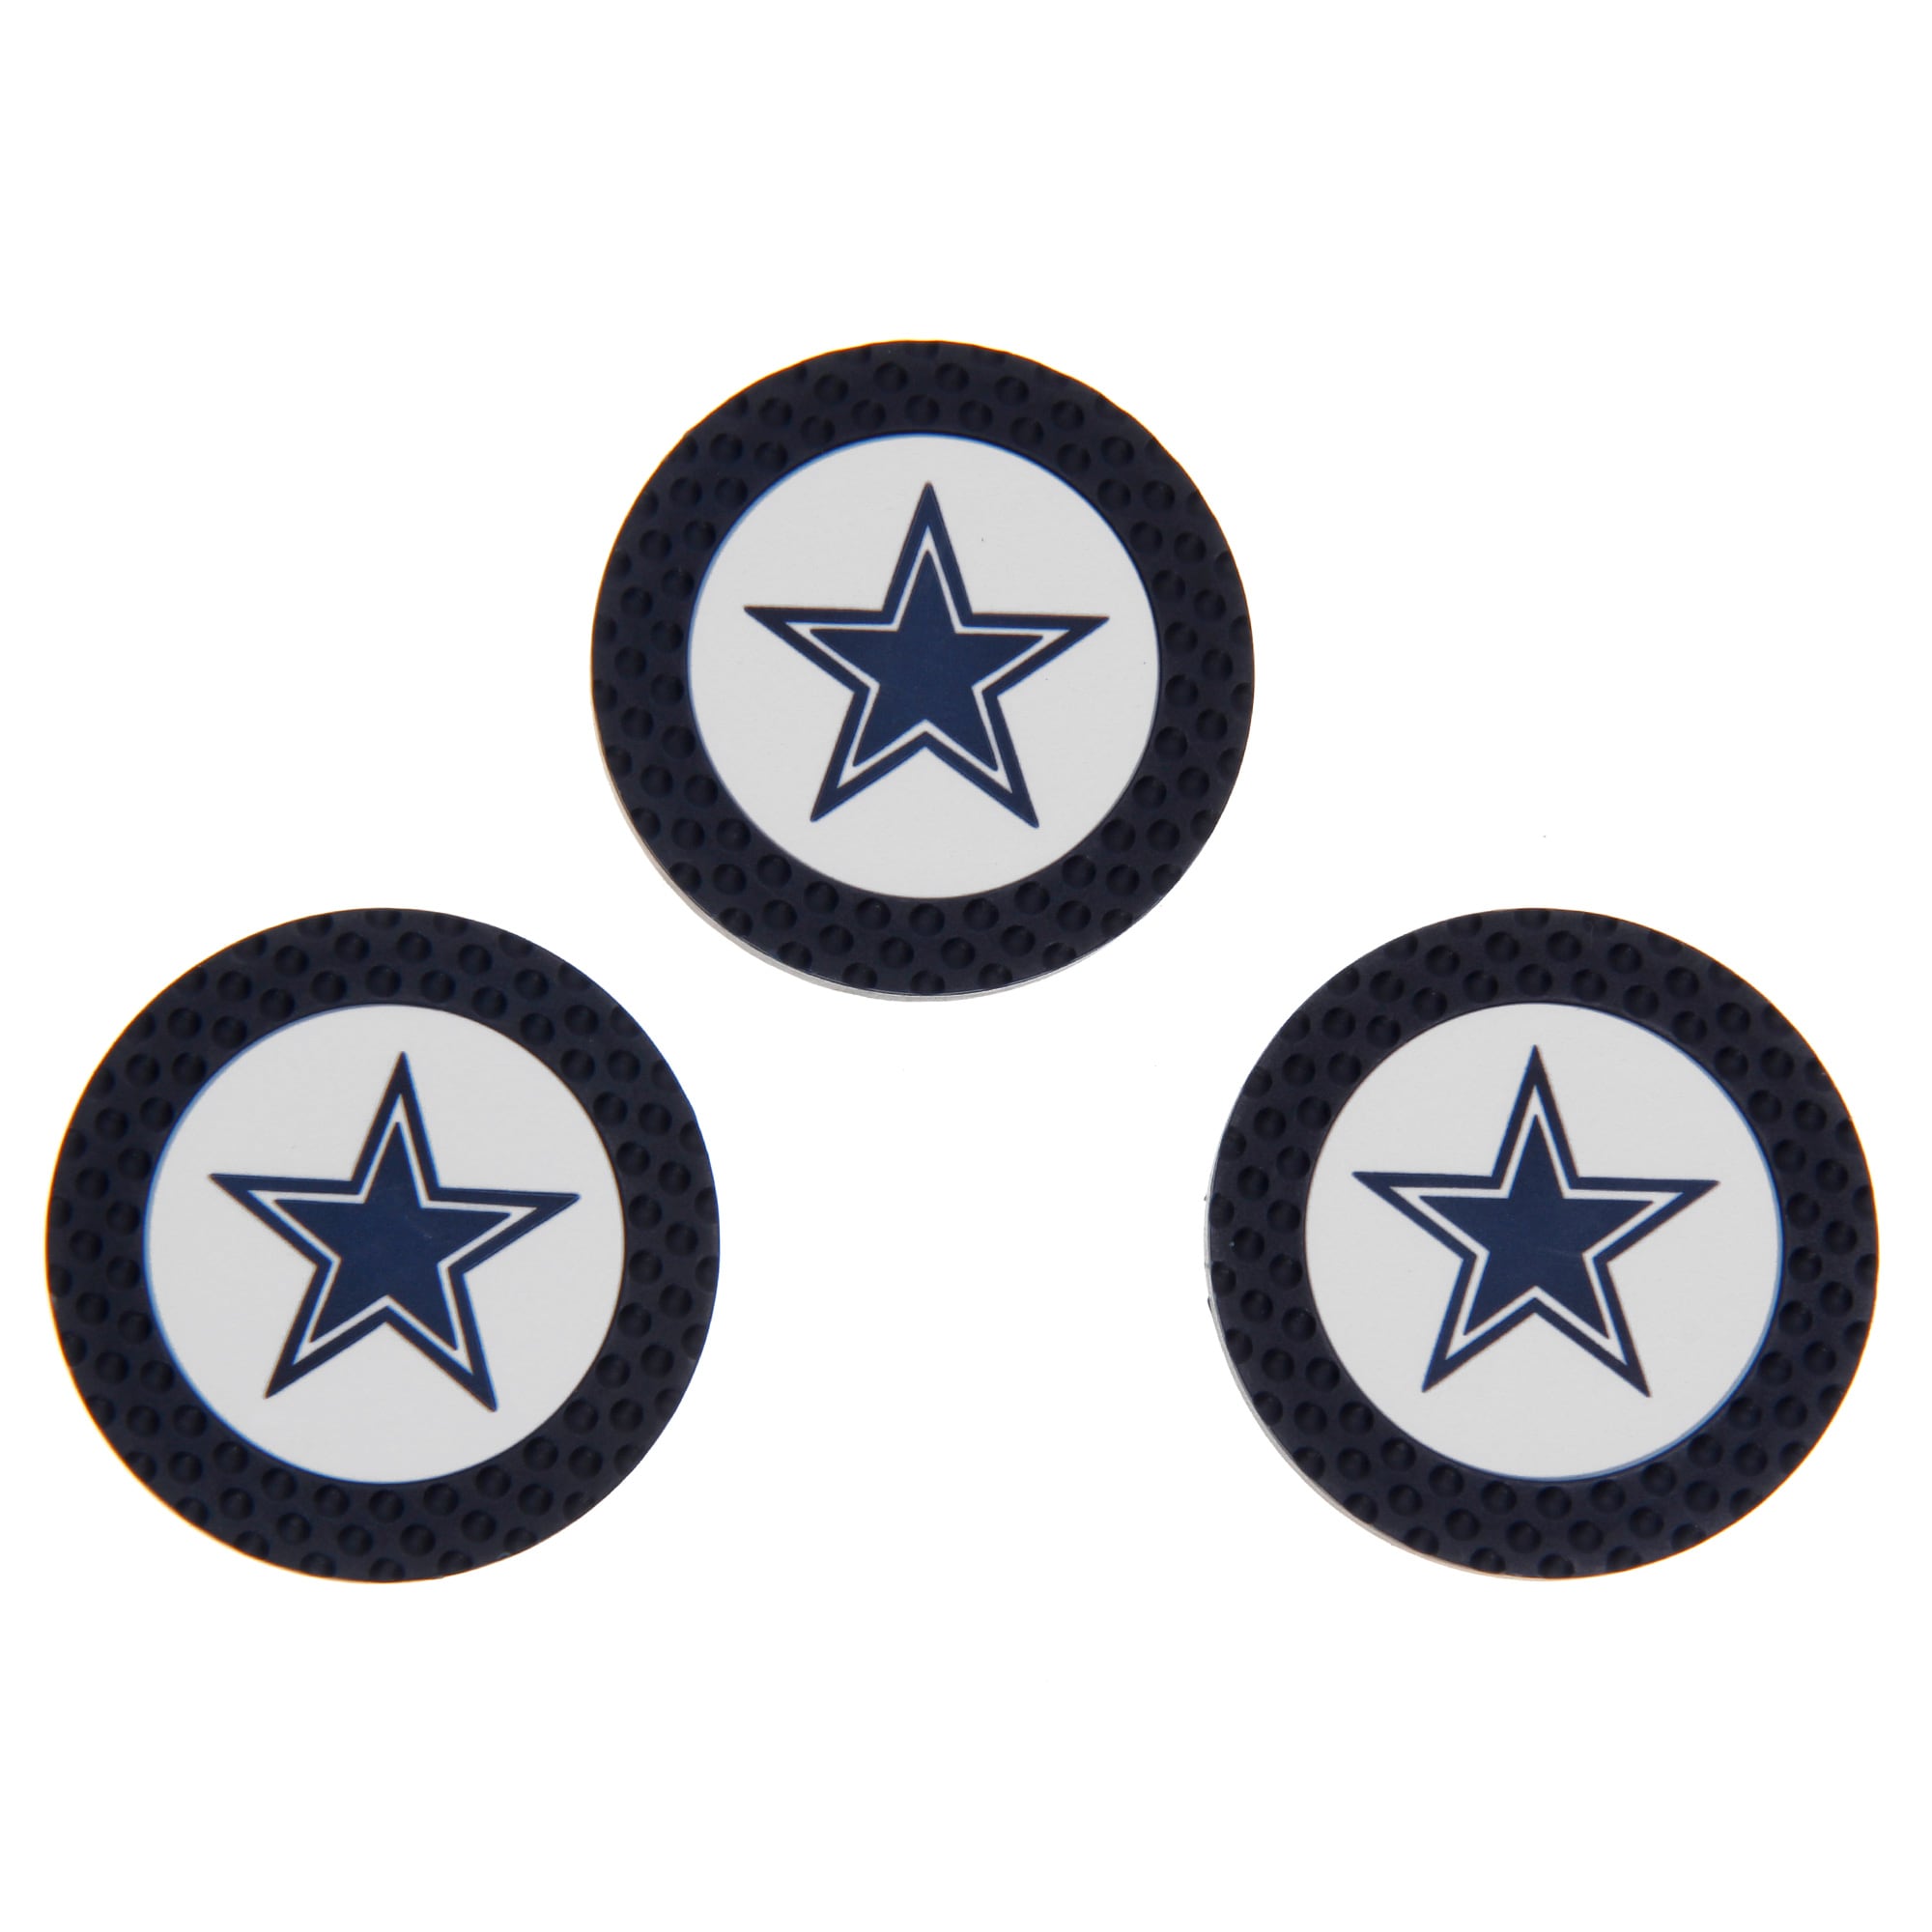 Dallas Cowboys 3-Pack Poker Chip Golf Ball Markers - image 2 of 2